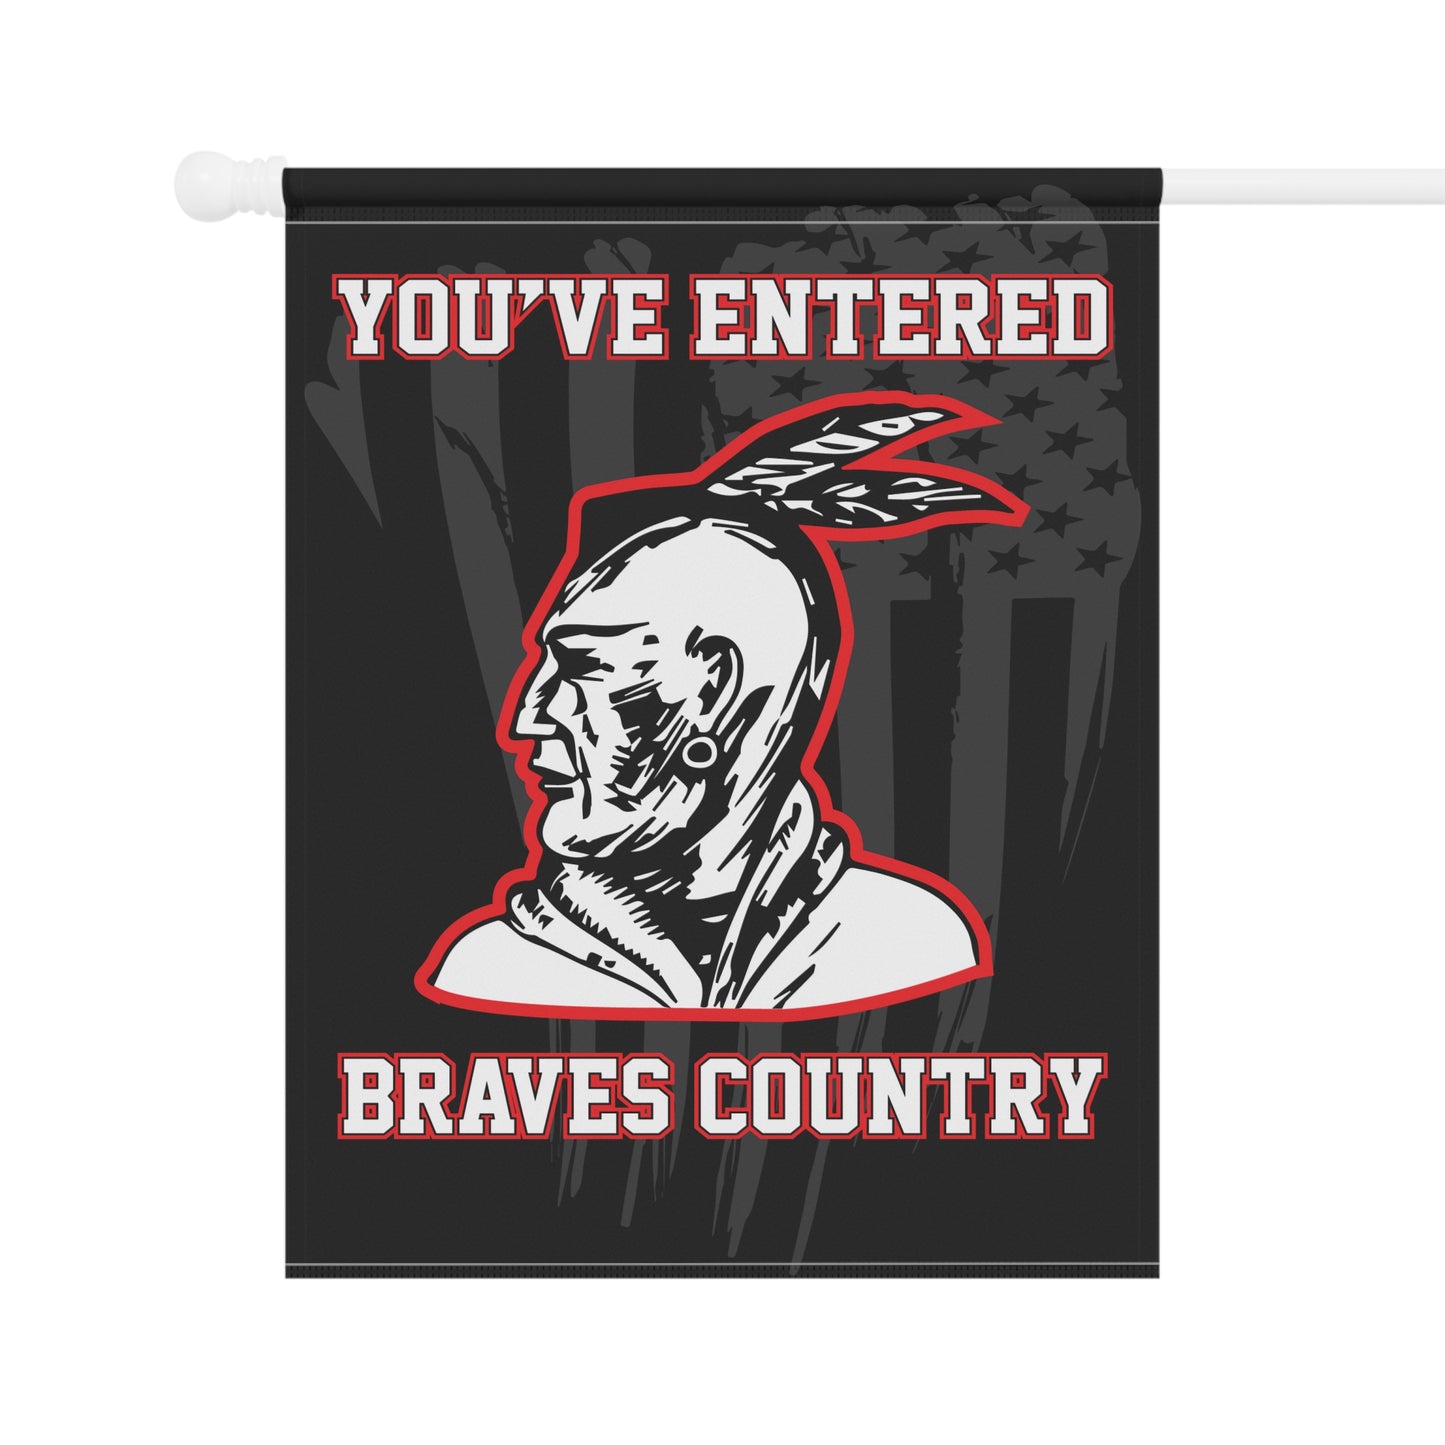 Braves Country Brave Head House Banner